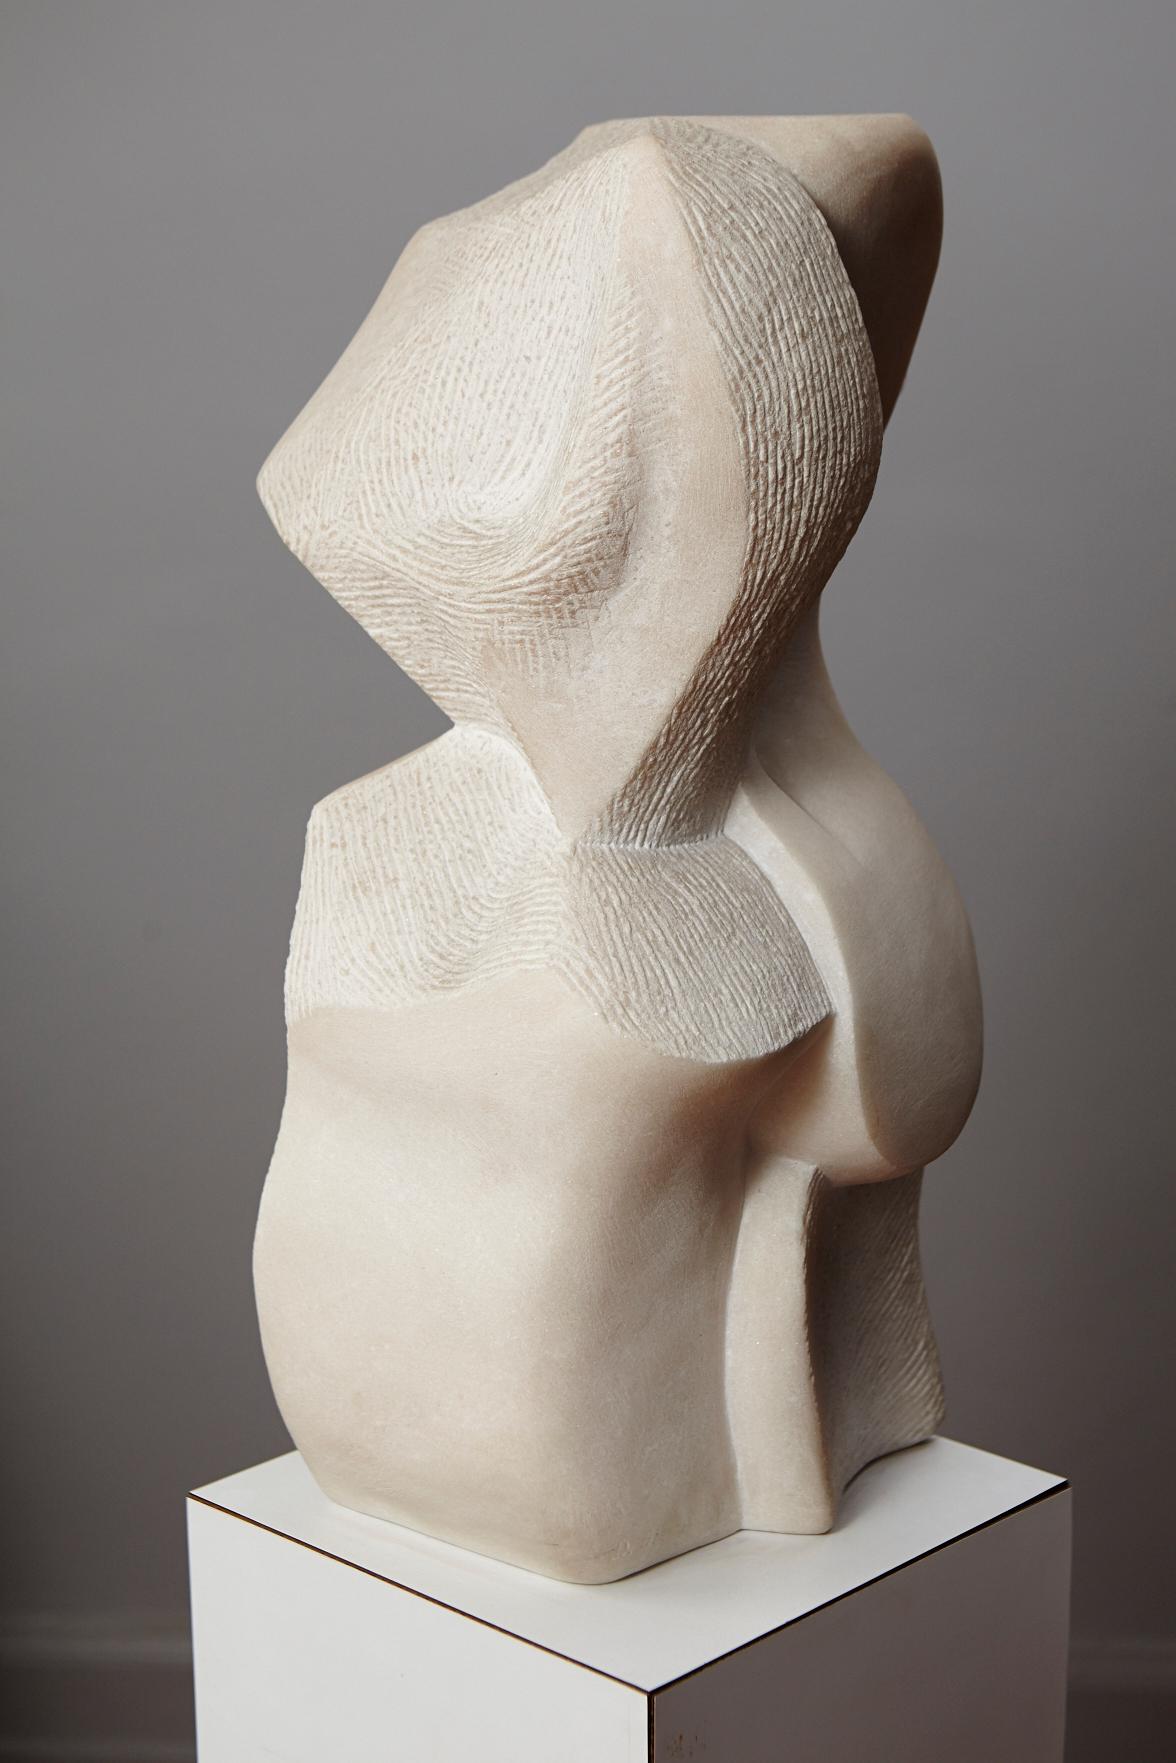 Dolores Singer, American (1936)
Artemis
Signed D. S. '90
Portugues pink marble marble sculpture, unpolished finish

A modern 20th century interpretation as an homage to the classic Greek sculptures.

Dolores Singer has used white Carrara marble in